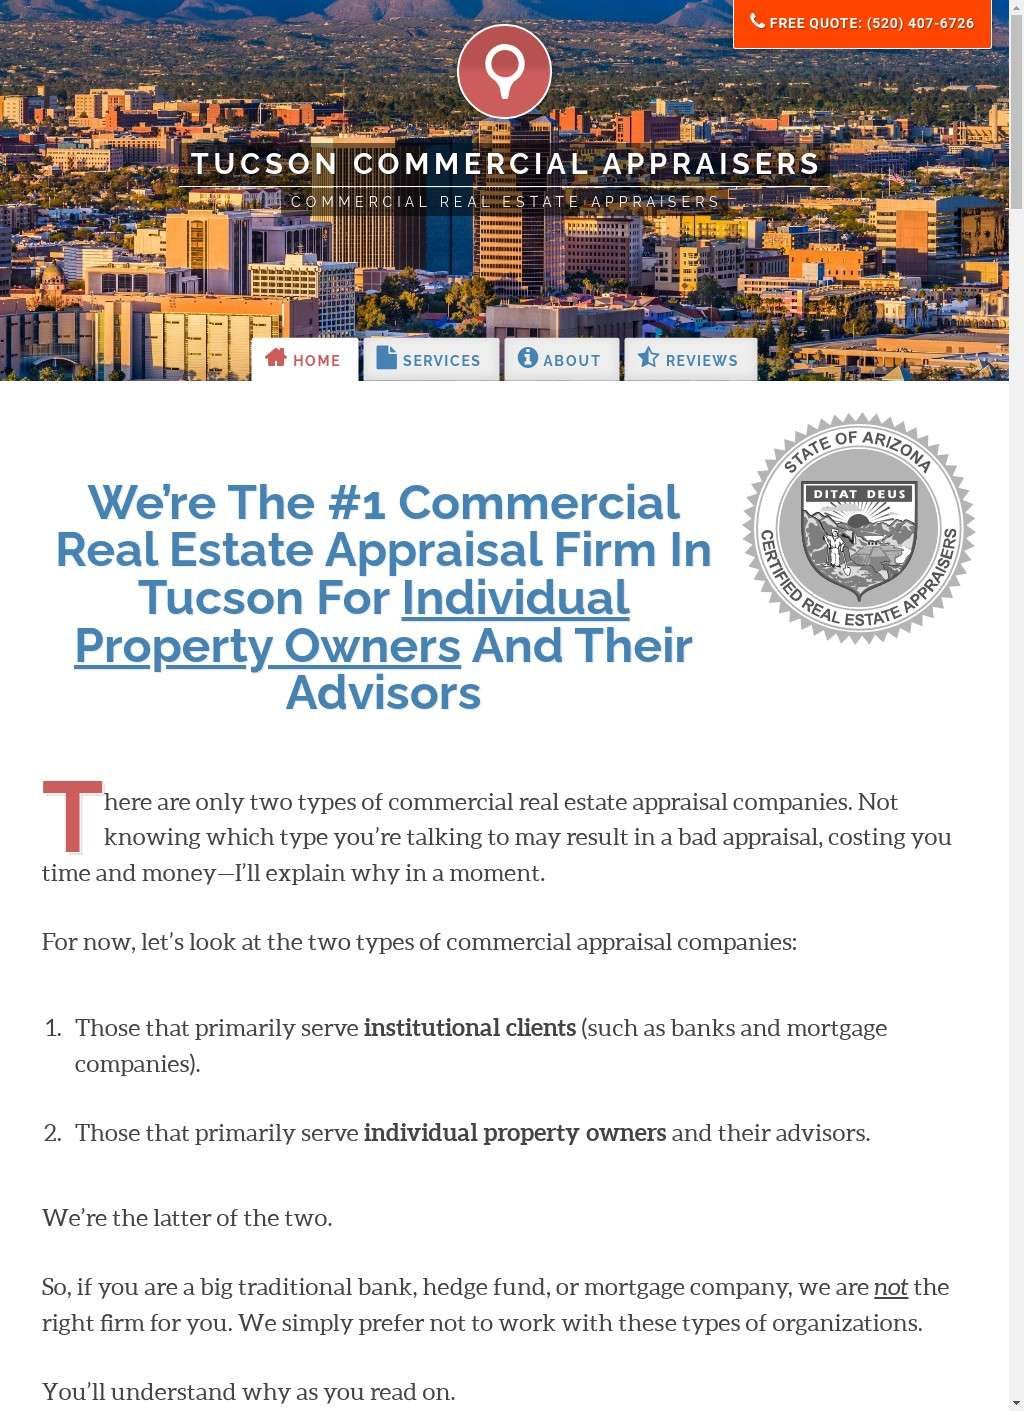 Appraisers of Tucson Commercial Property